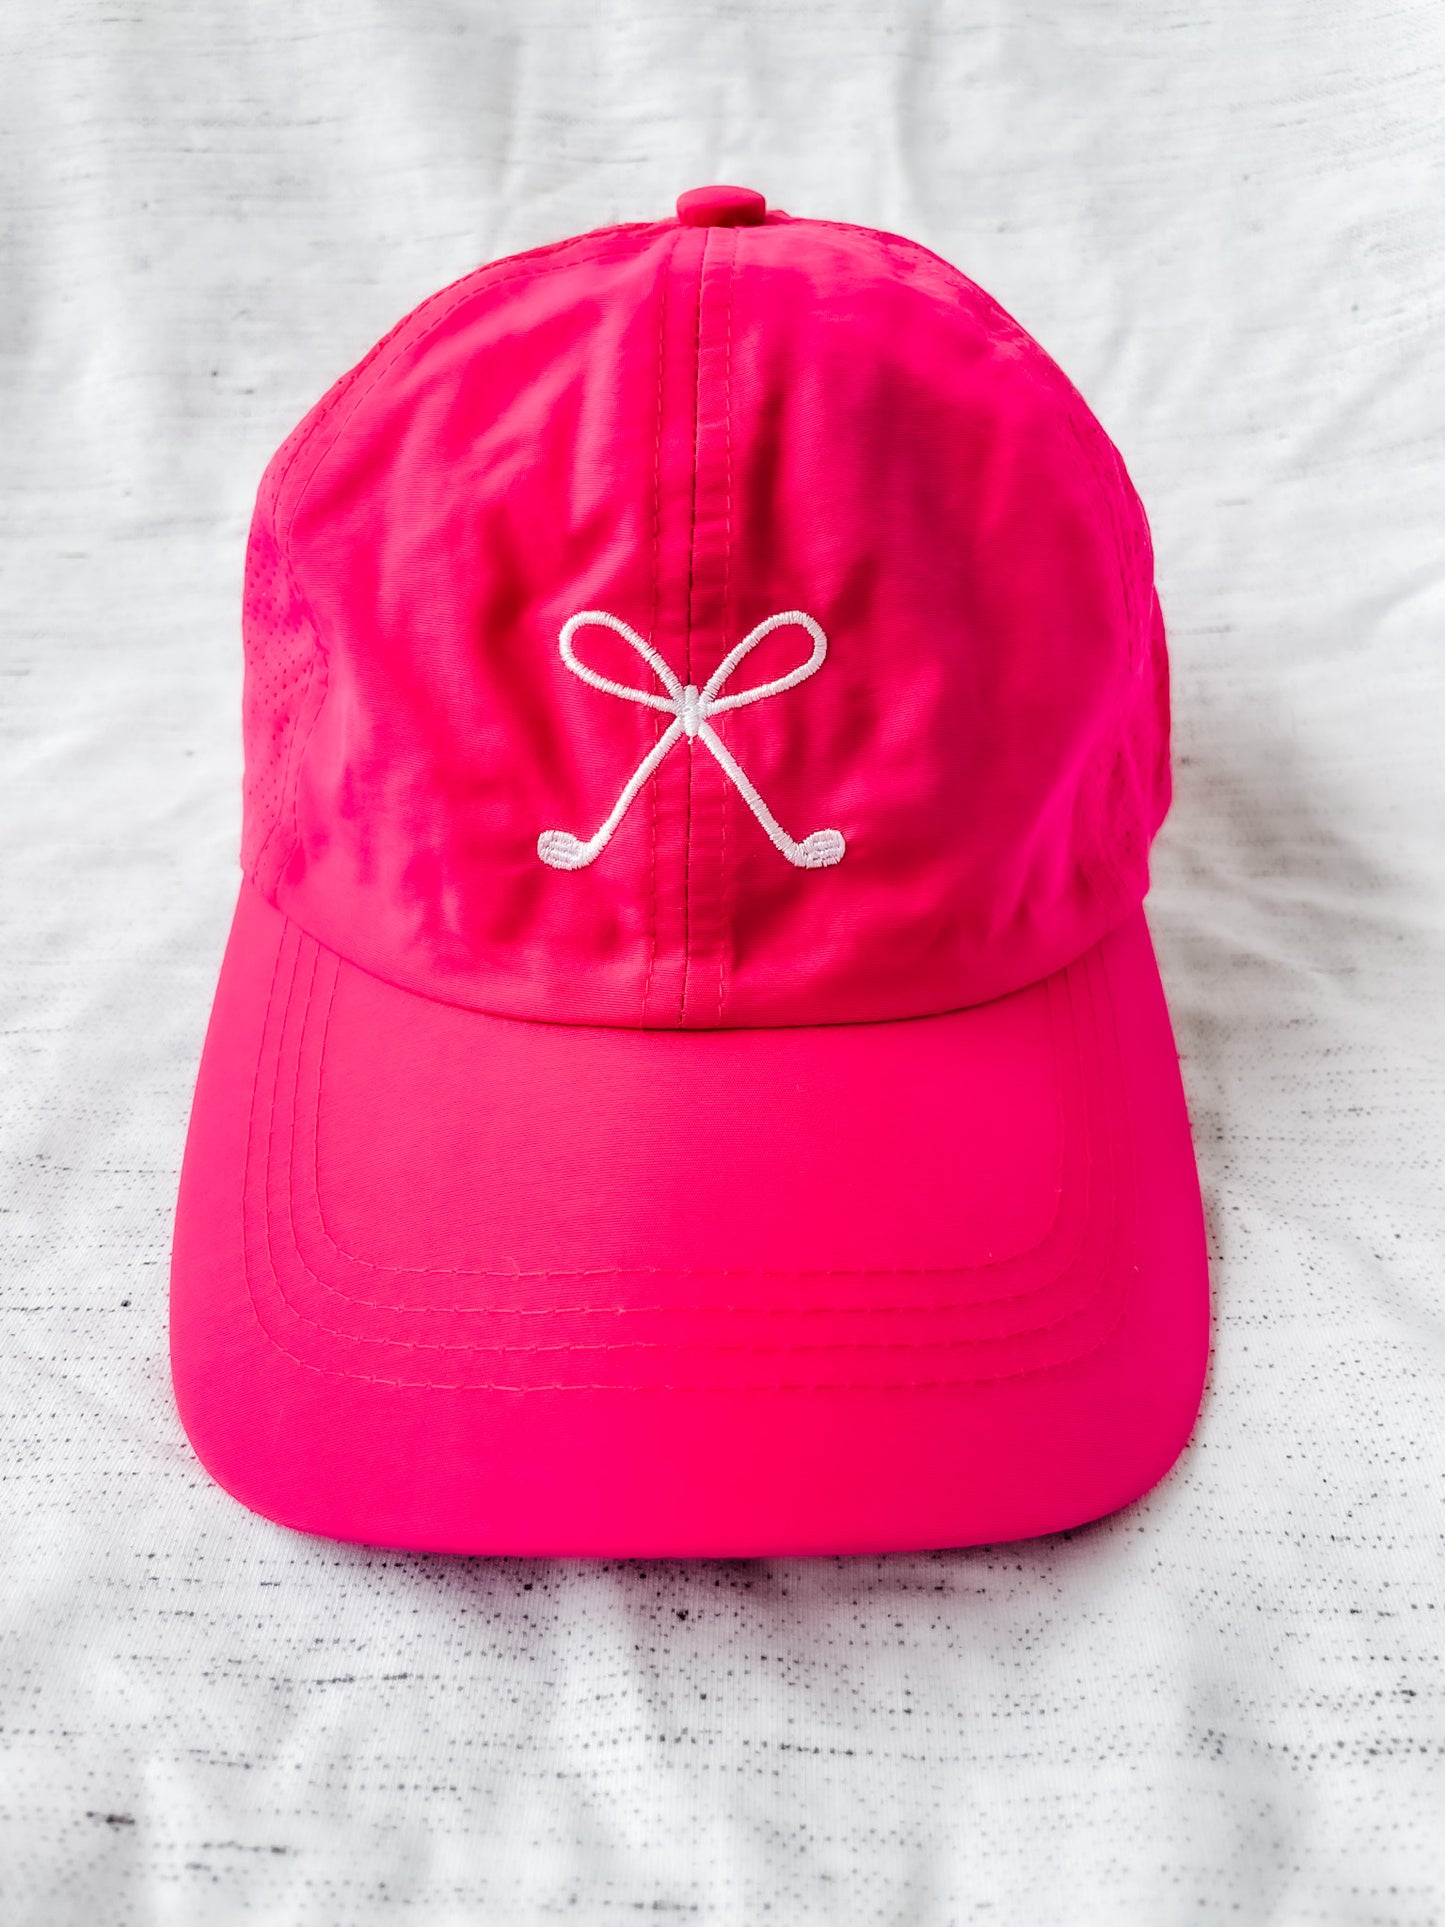 Golf Bow ~ Solid Pink Navy Cap w/ Embroidered Bow